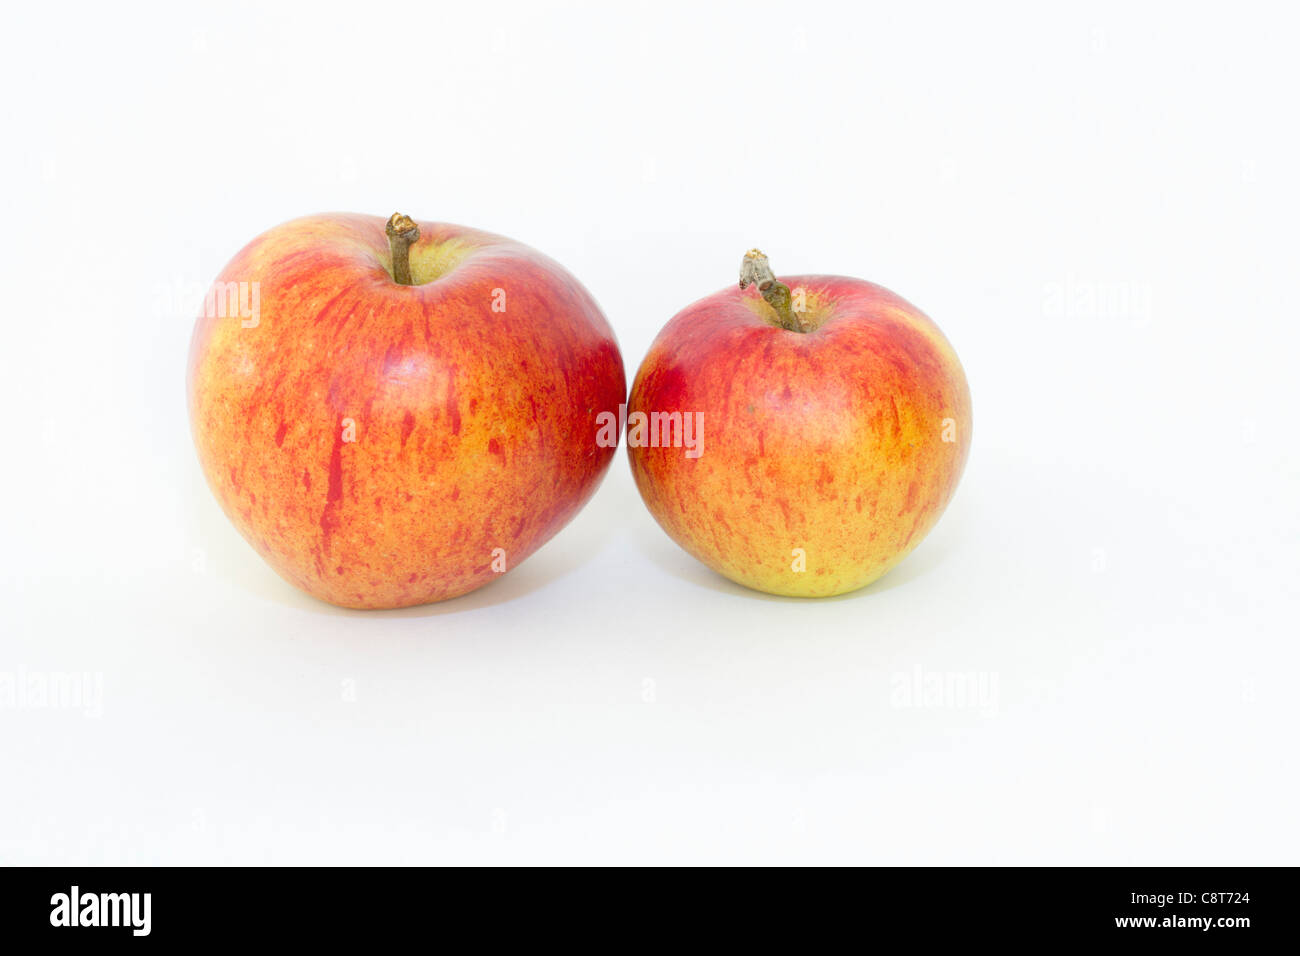 Red Pippin or Fiesta apples on white background Stock Photo